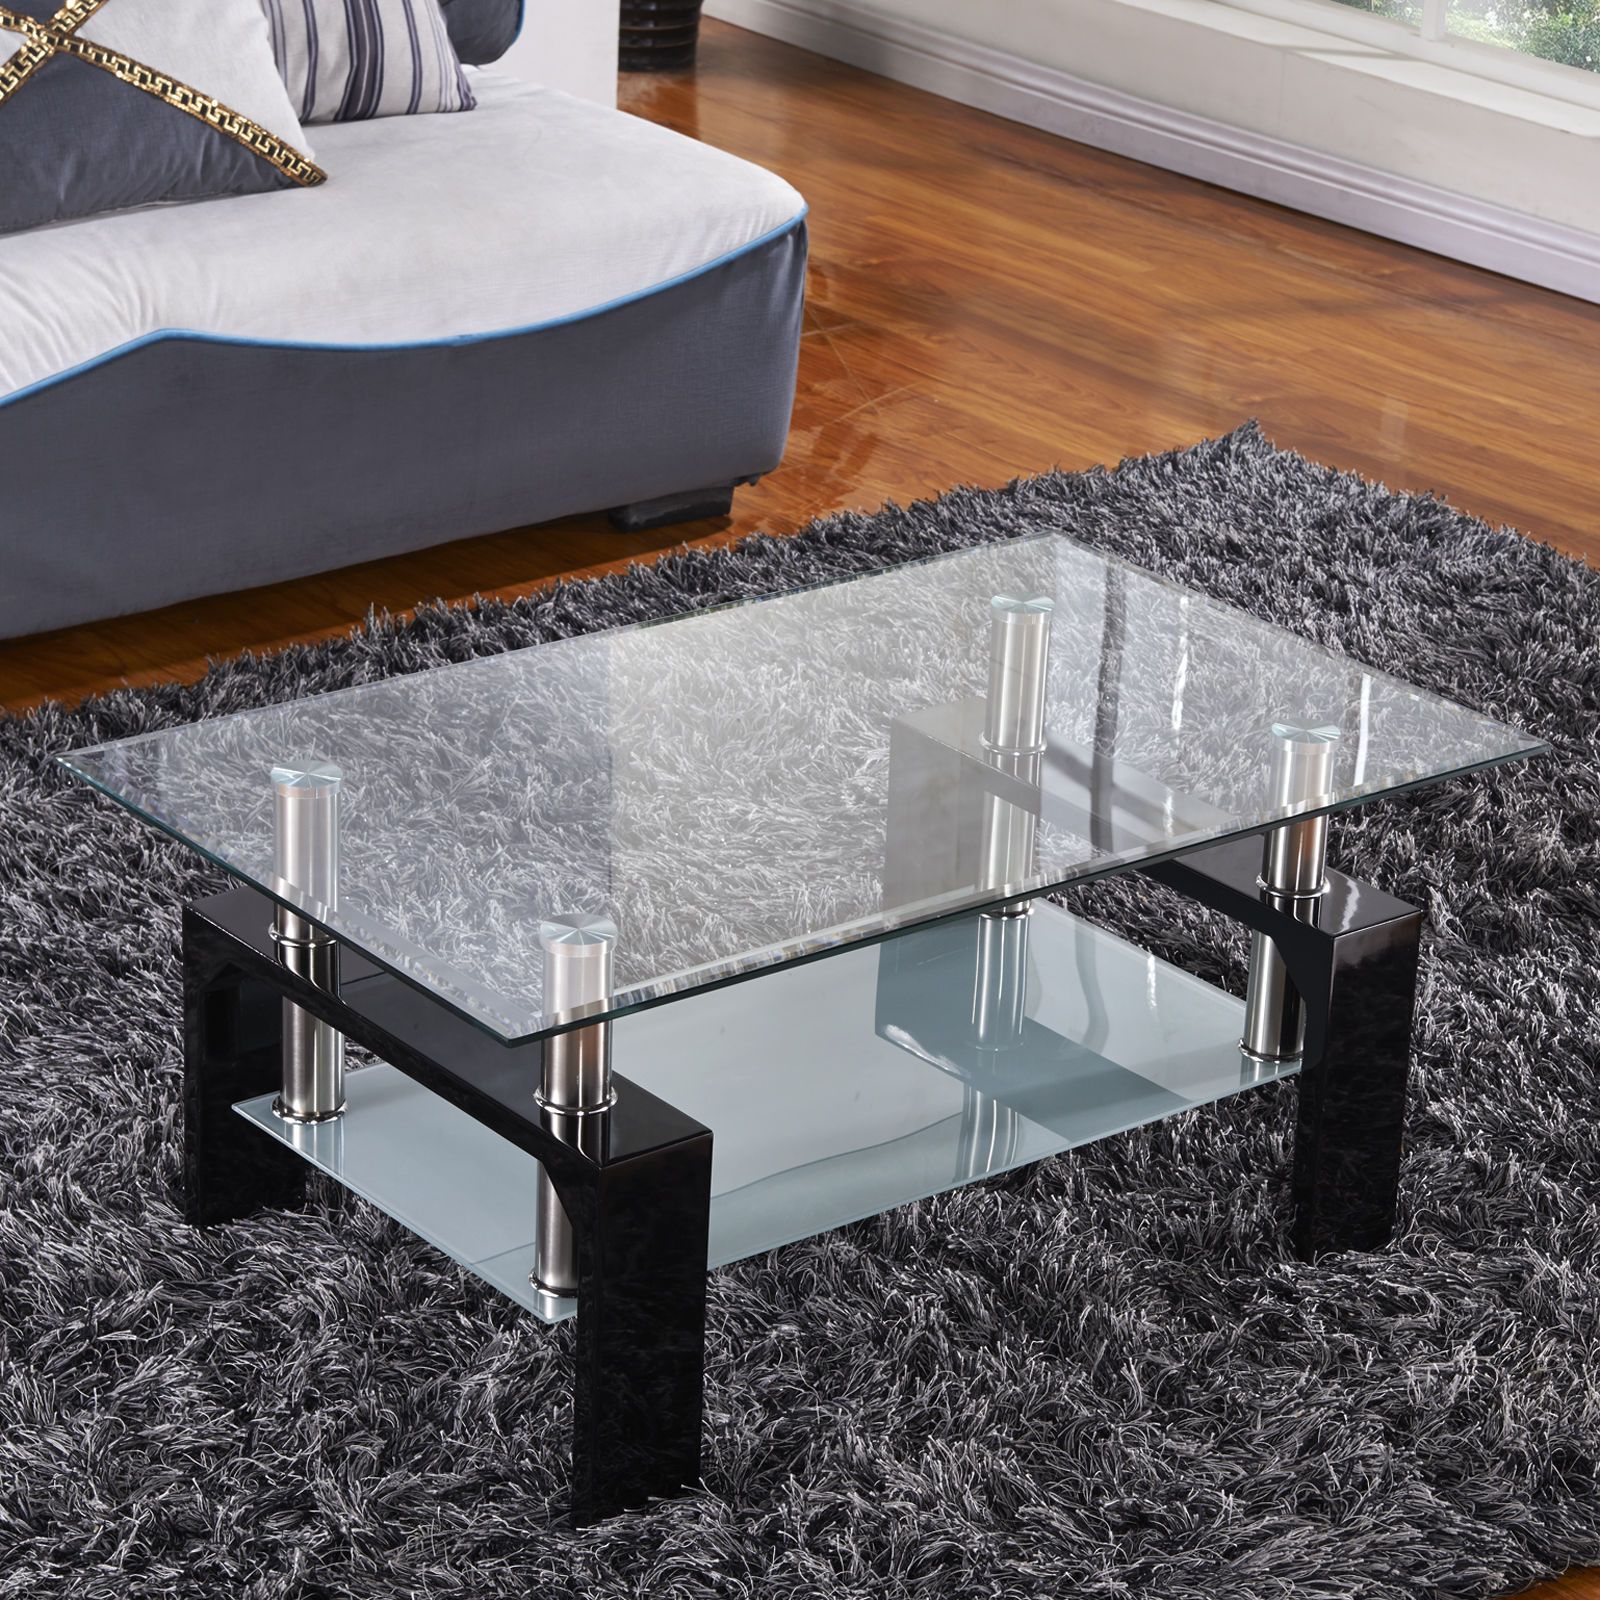 Design Glass Top Black Legs Coffee Table Rectangular In Chrome And Glass Rectangular Coffee Tables (Photo 5 of 15)